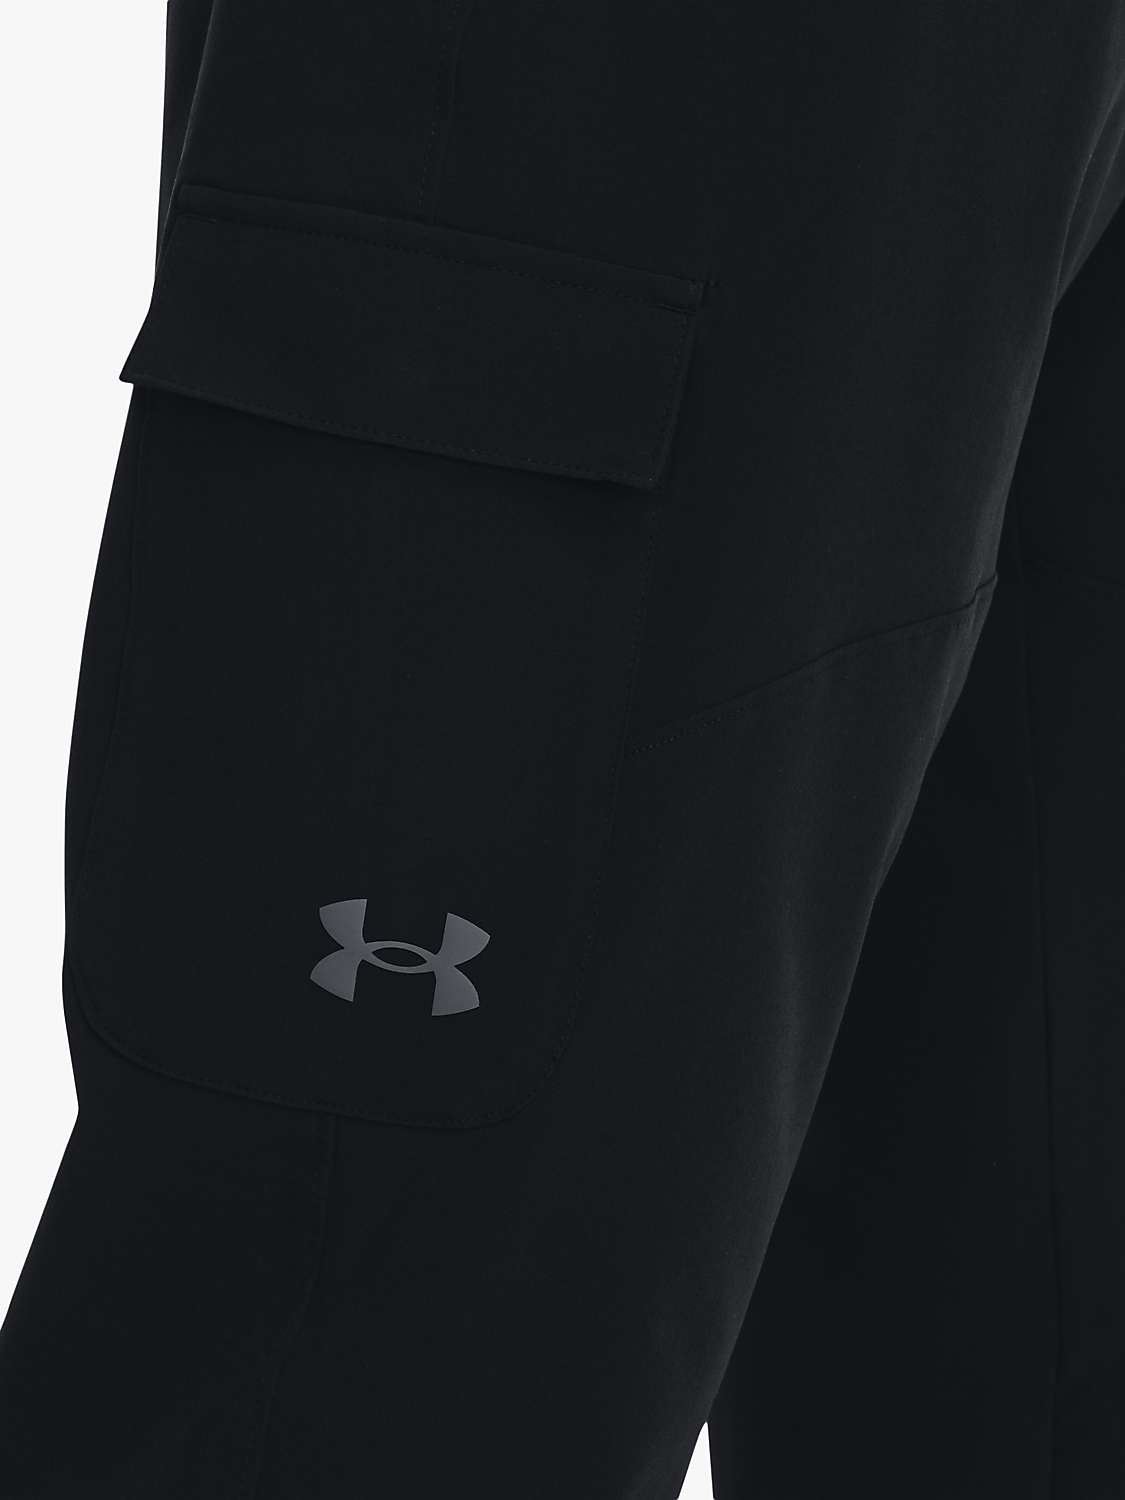 Buy Under Armour Stretch Woven Cargo Trousers, Black Online at johnlewis.com